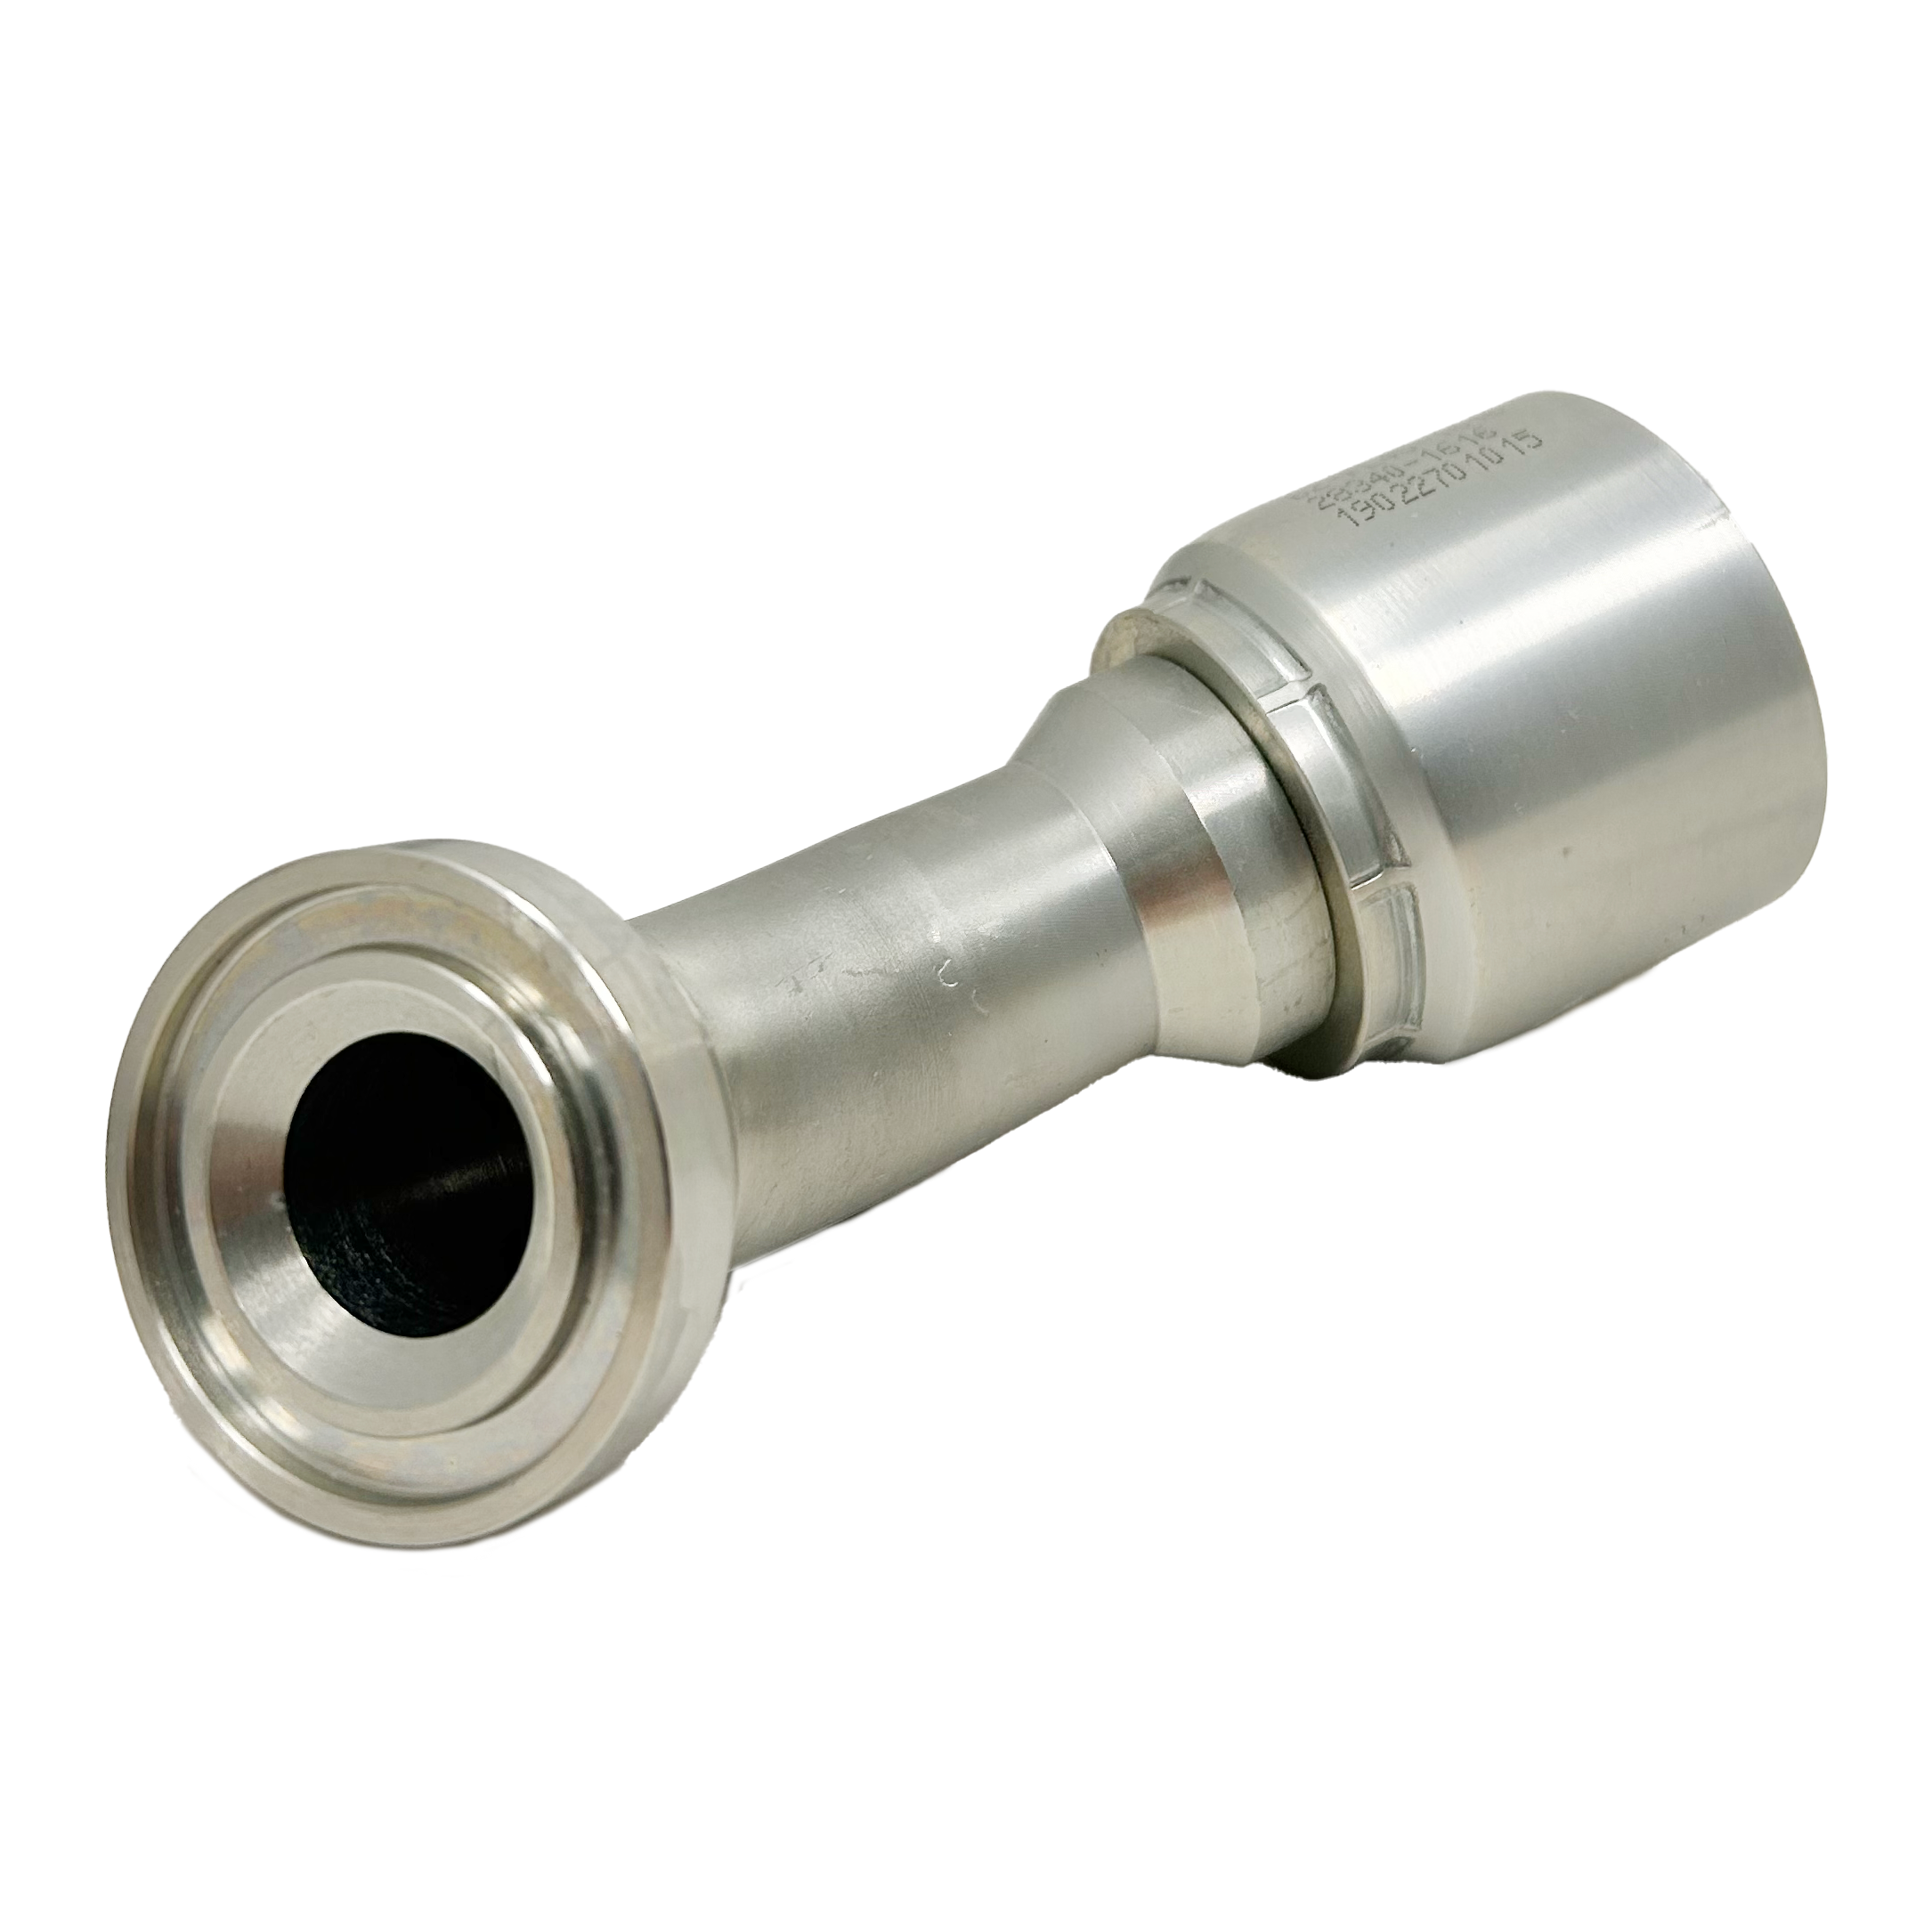 B2-FL45-3232: Continental Hose Fitting, 2" Hose ID x 2" Code 61, 45-Degree Connection